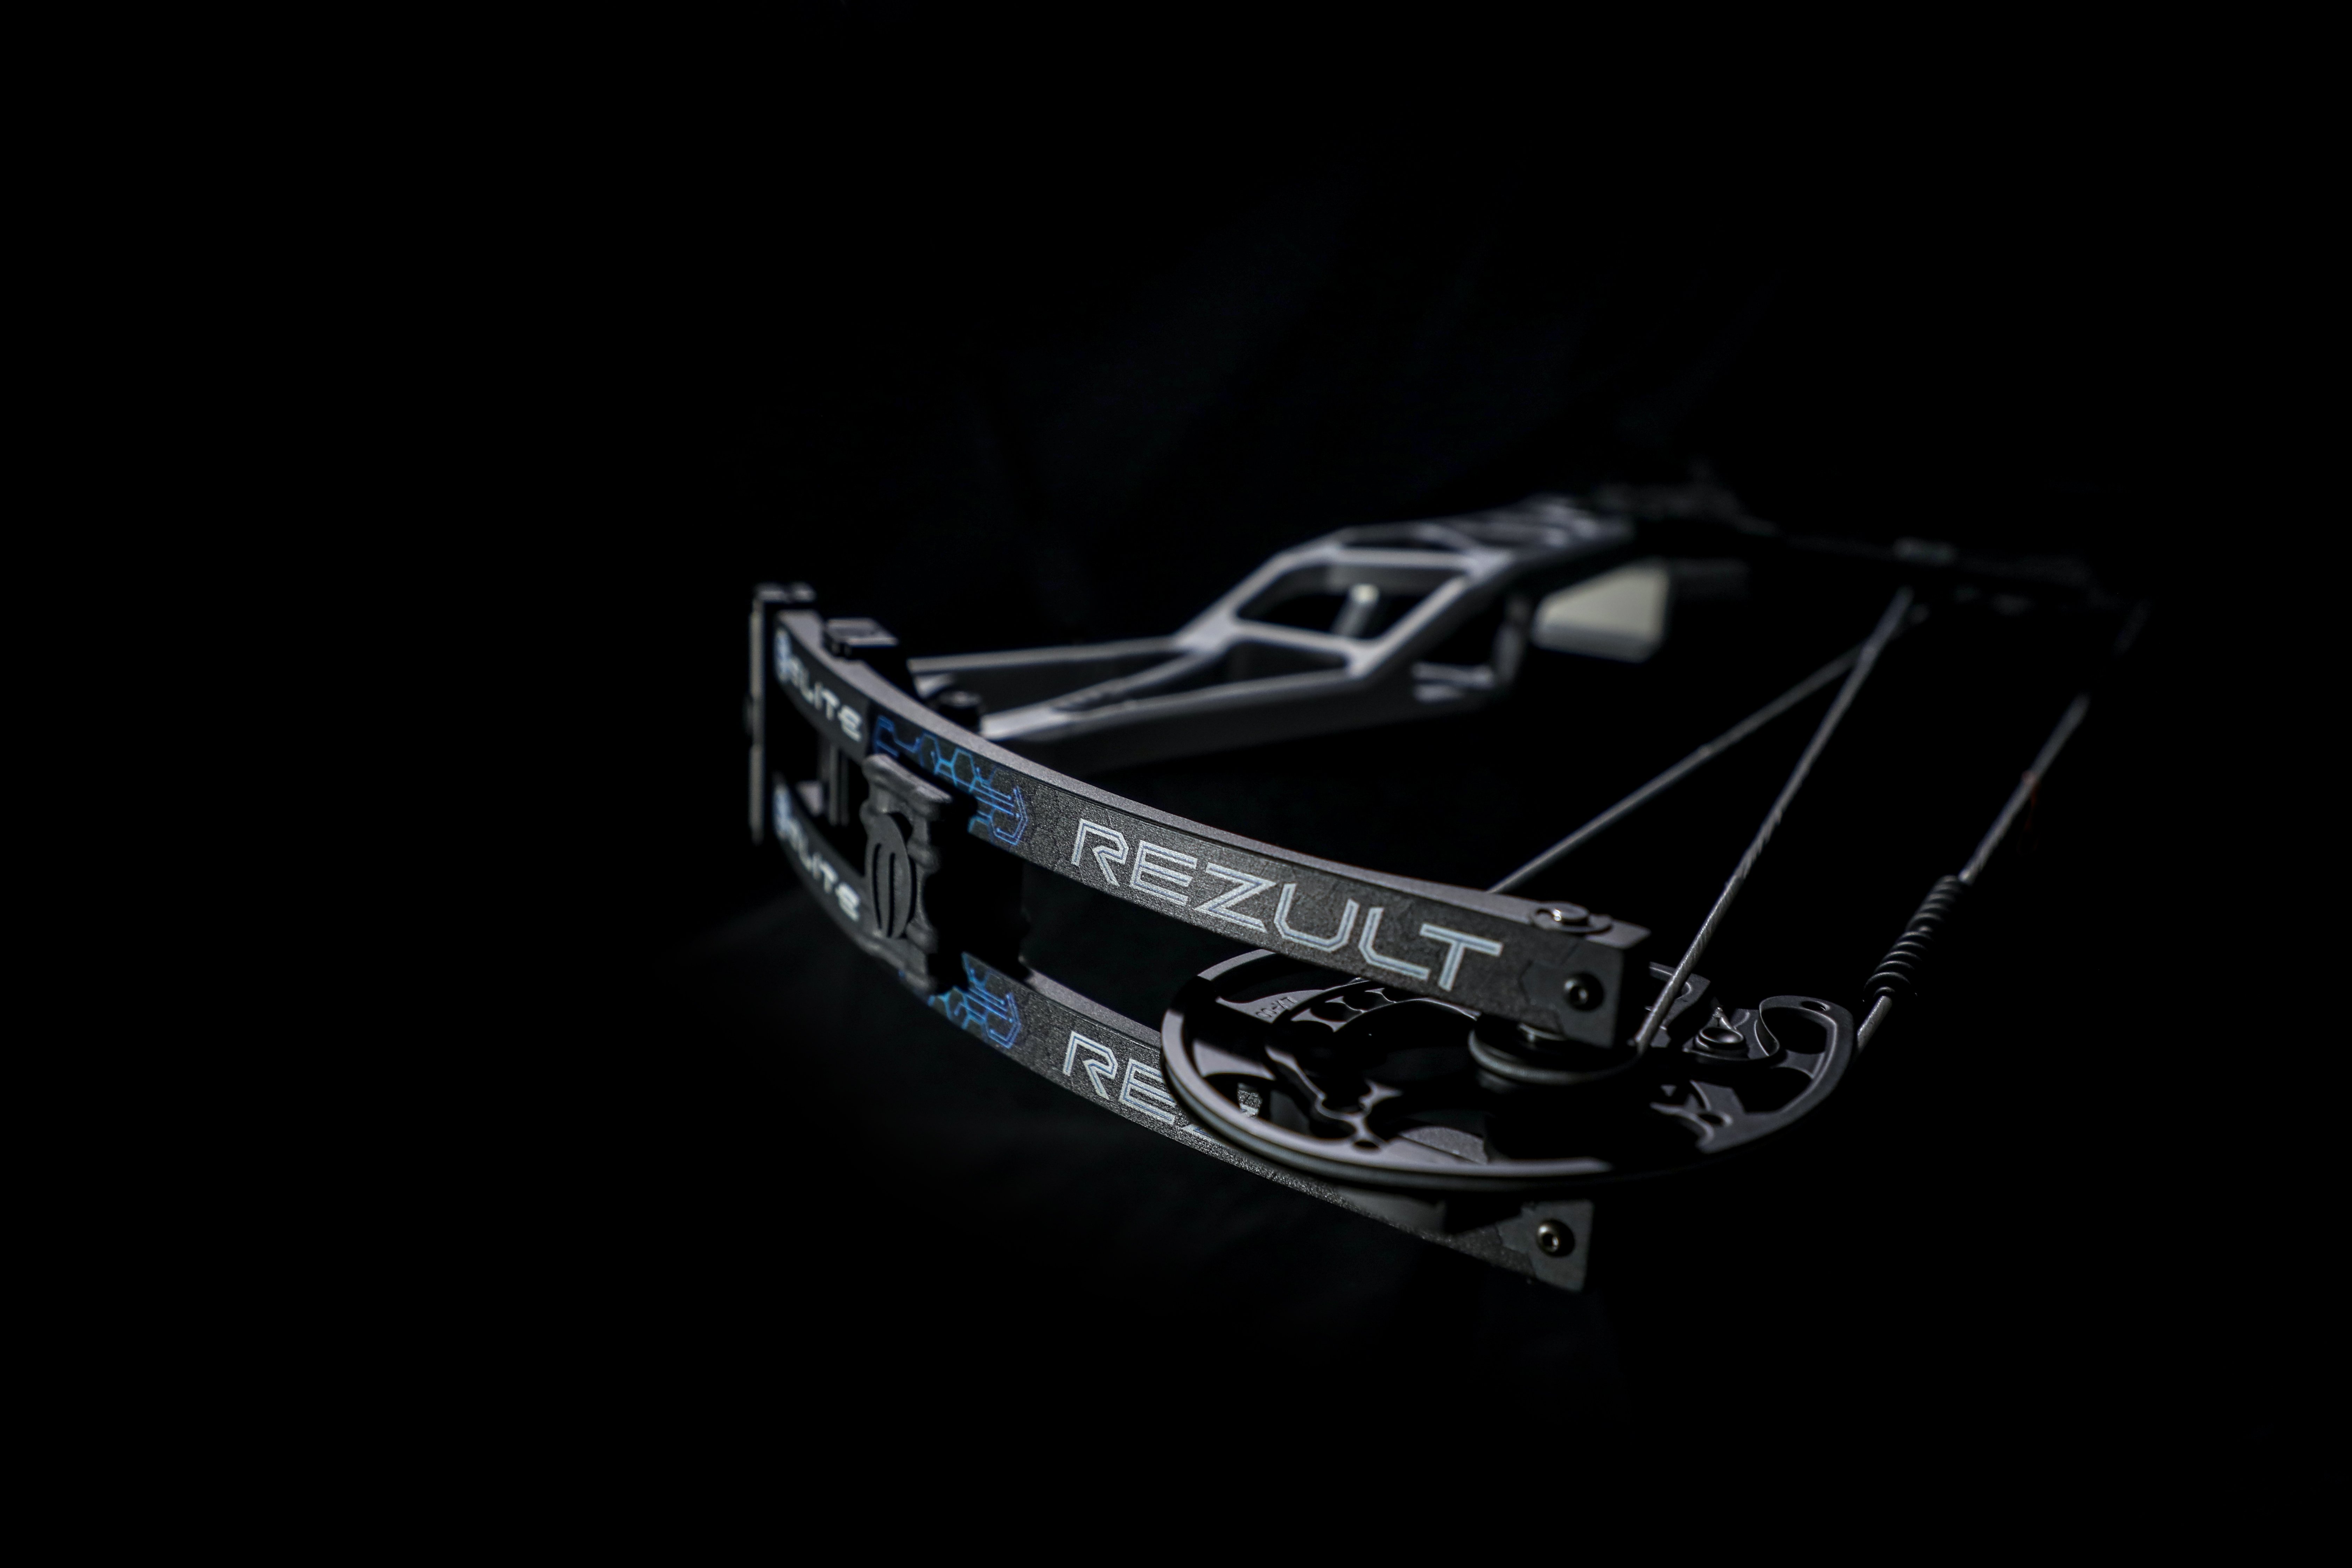 Elite's 2020 REZULT is the most tunable competition bow on the market